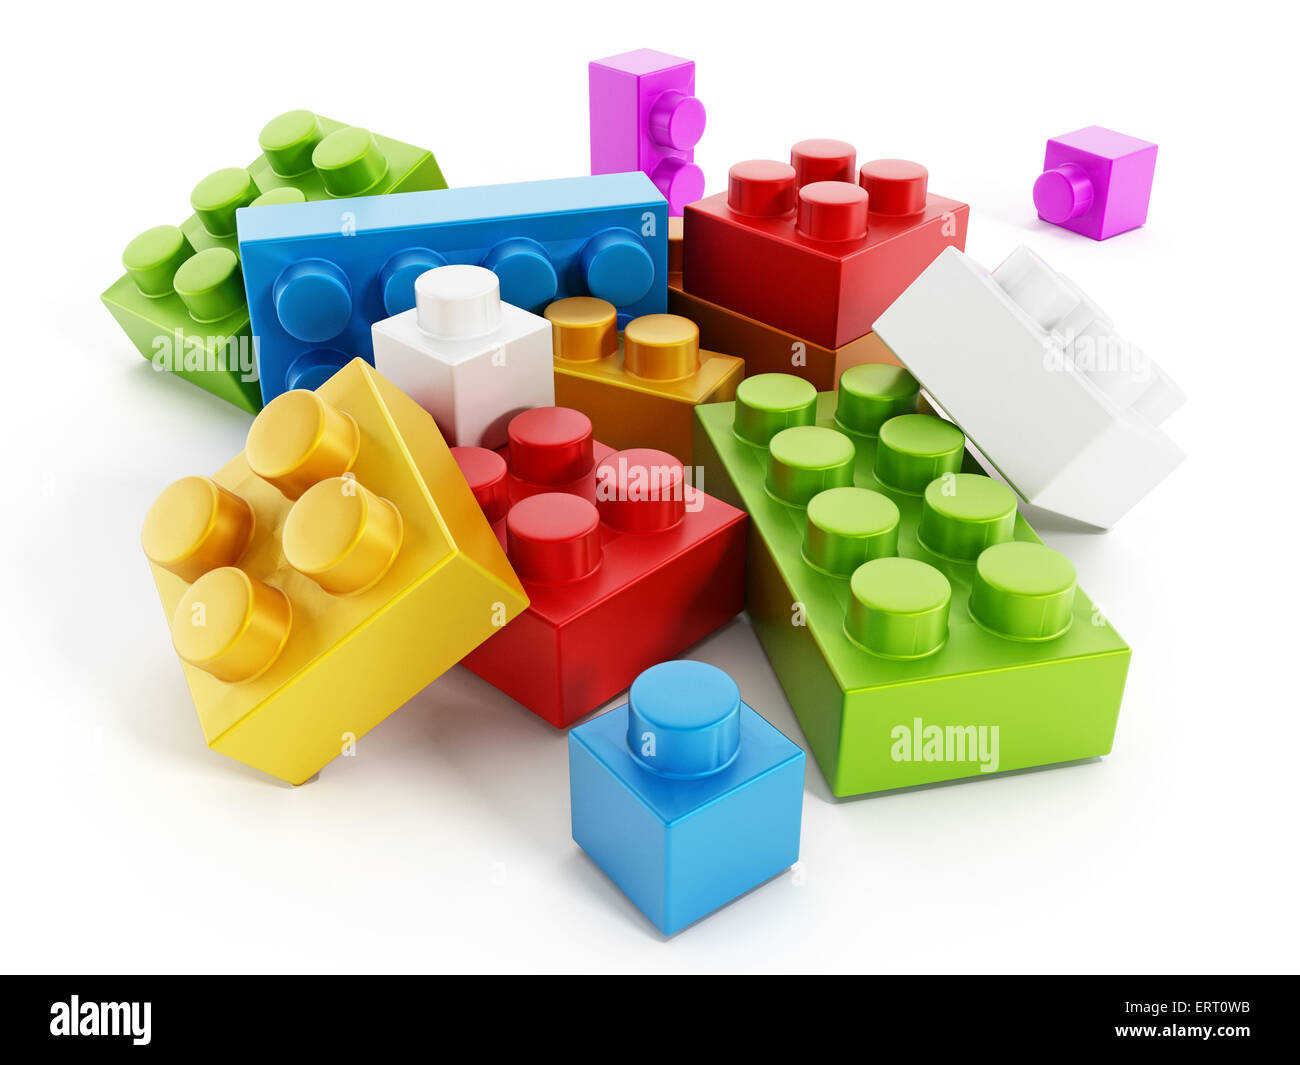 Colorful building block toy parts isolated on white background Stock Photo